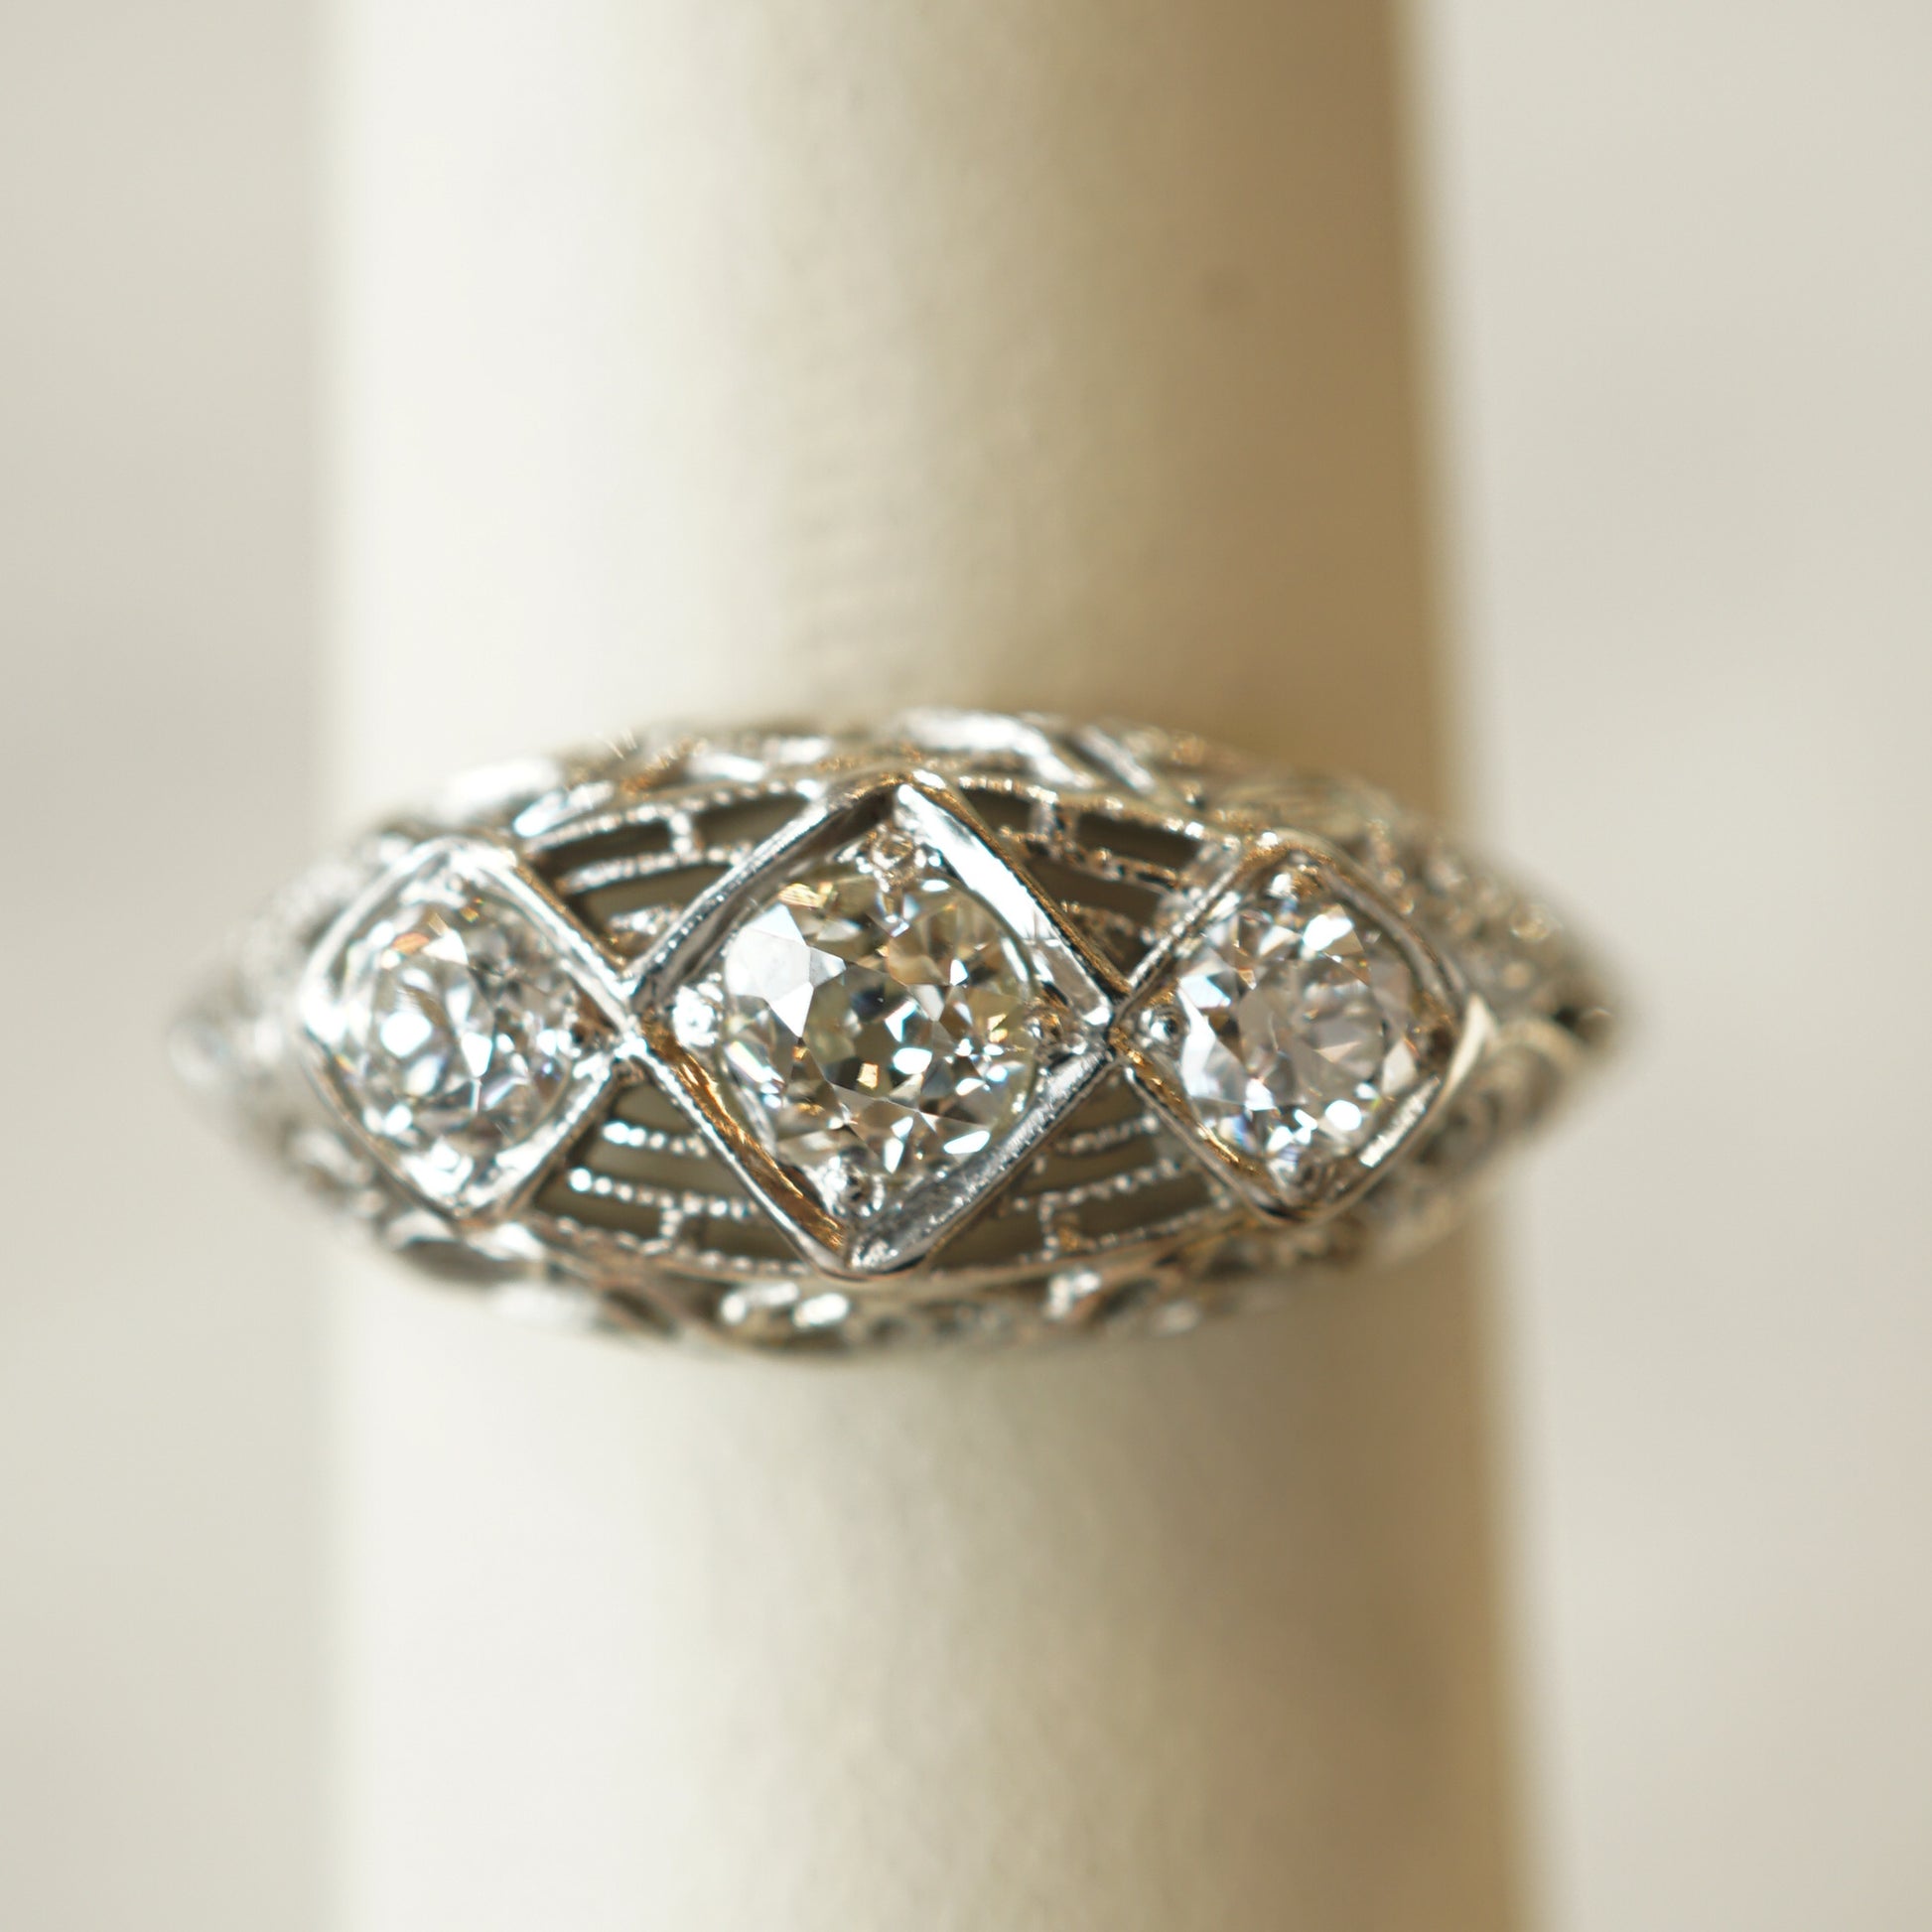 Antique Filigree Three Stone Engagement Ring in 18k White Gold